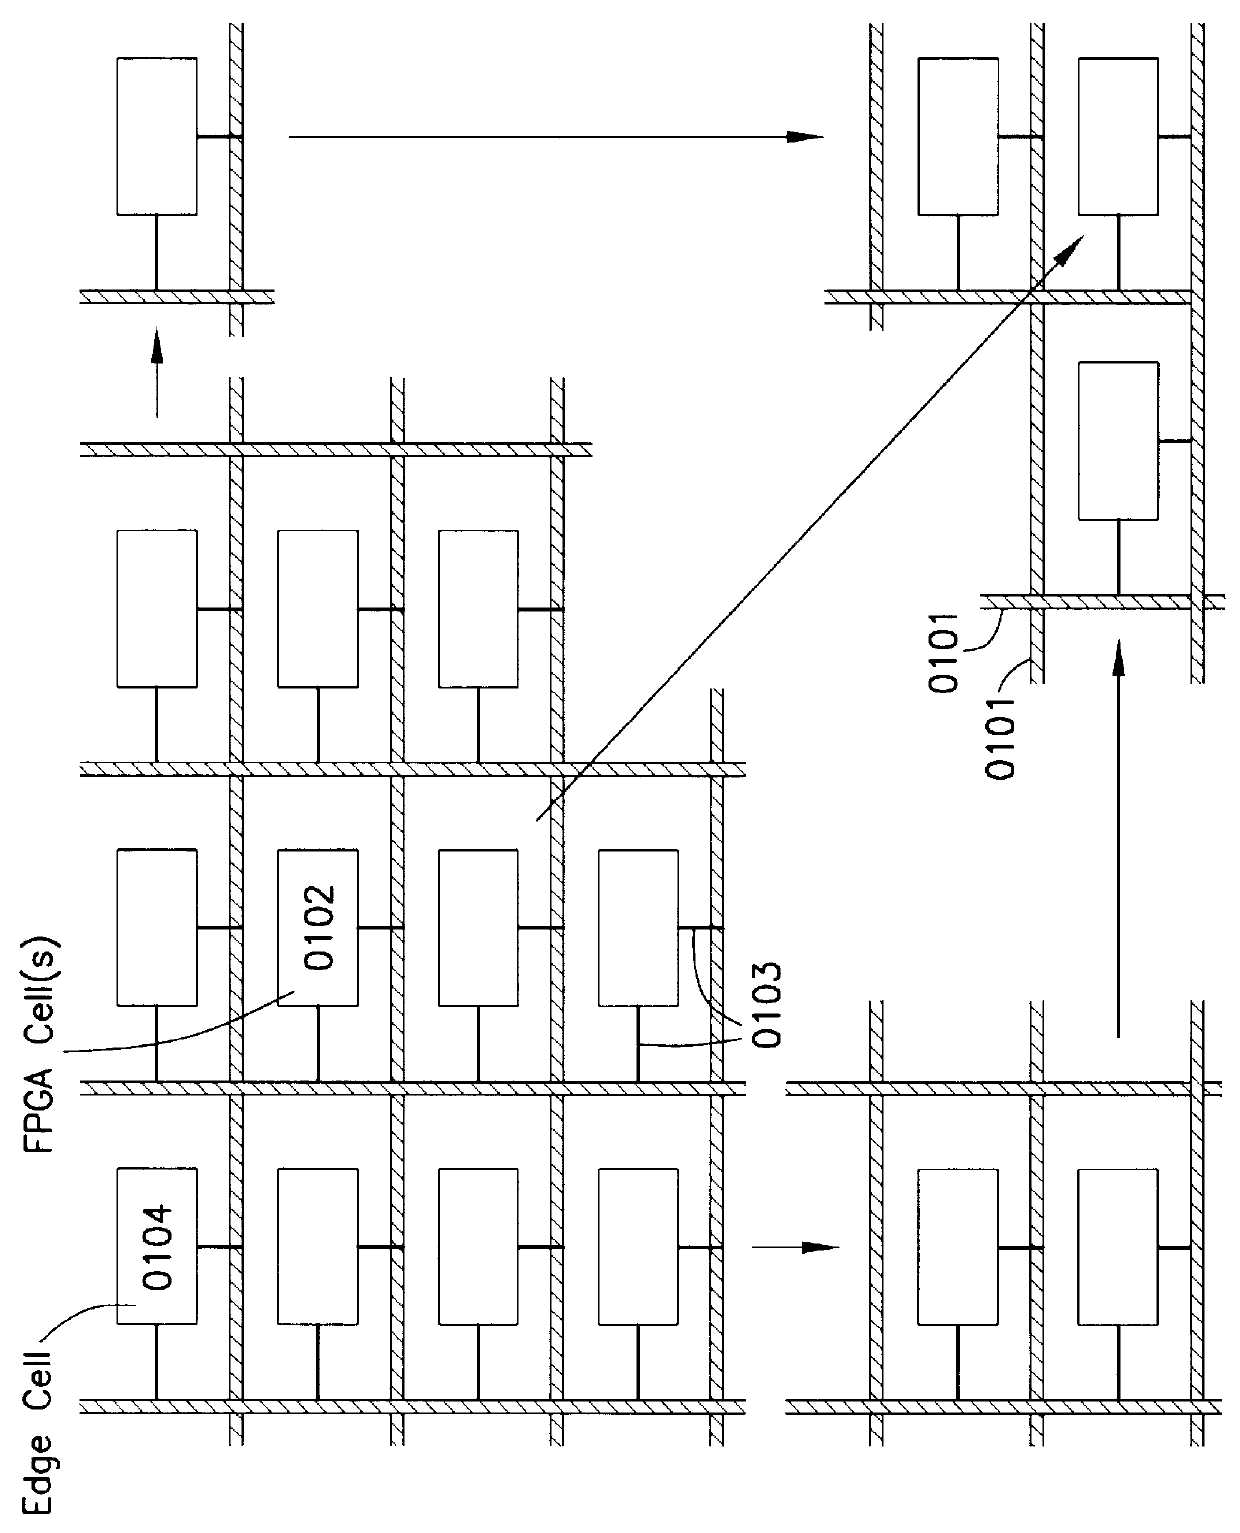 I/O and memory bus system for DFPs and units with two- or multi-dimensional programmable cell architectures